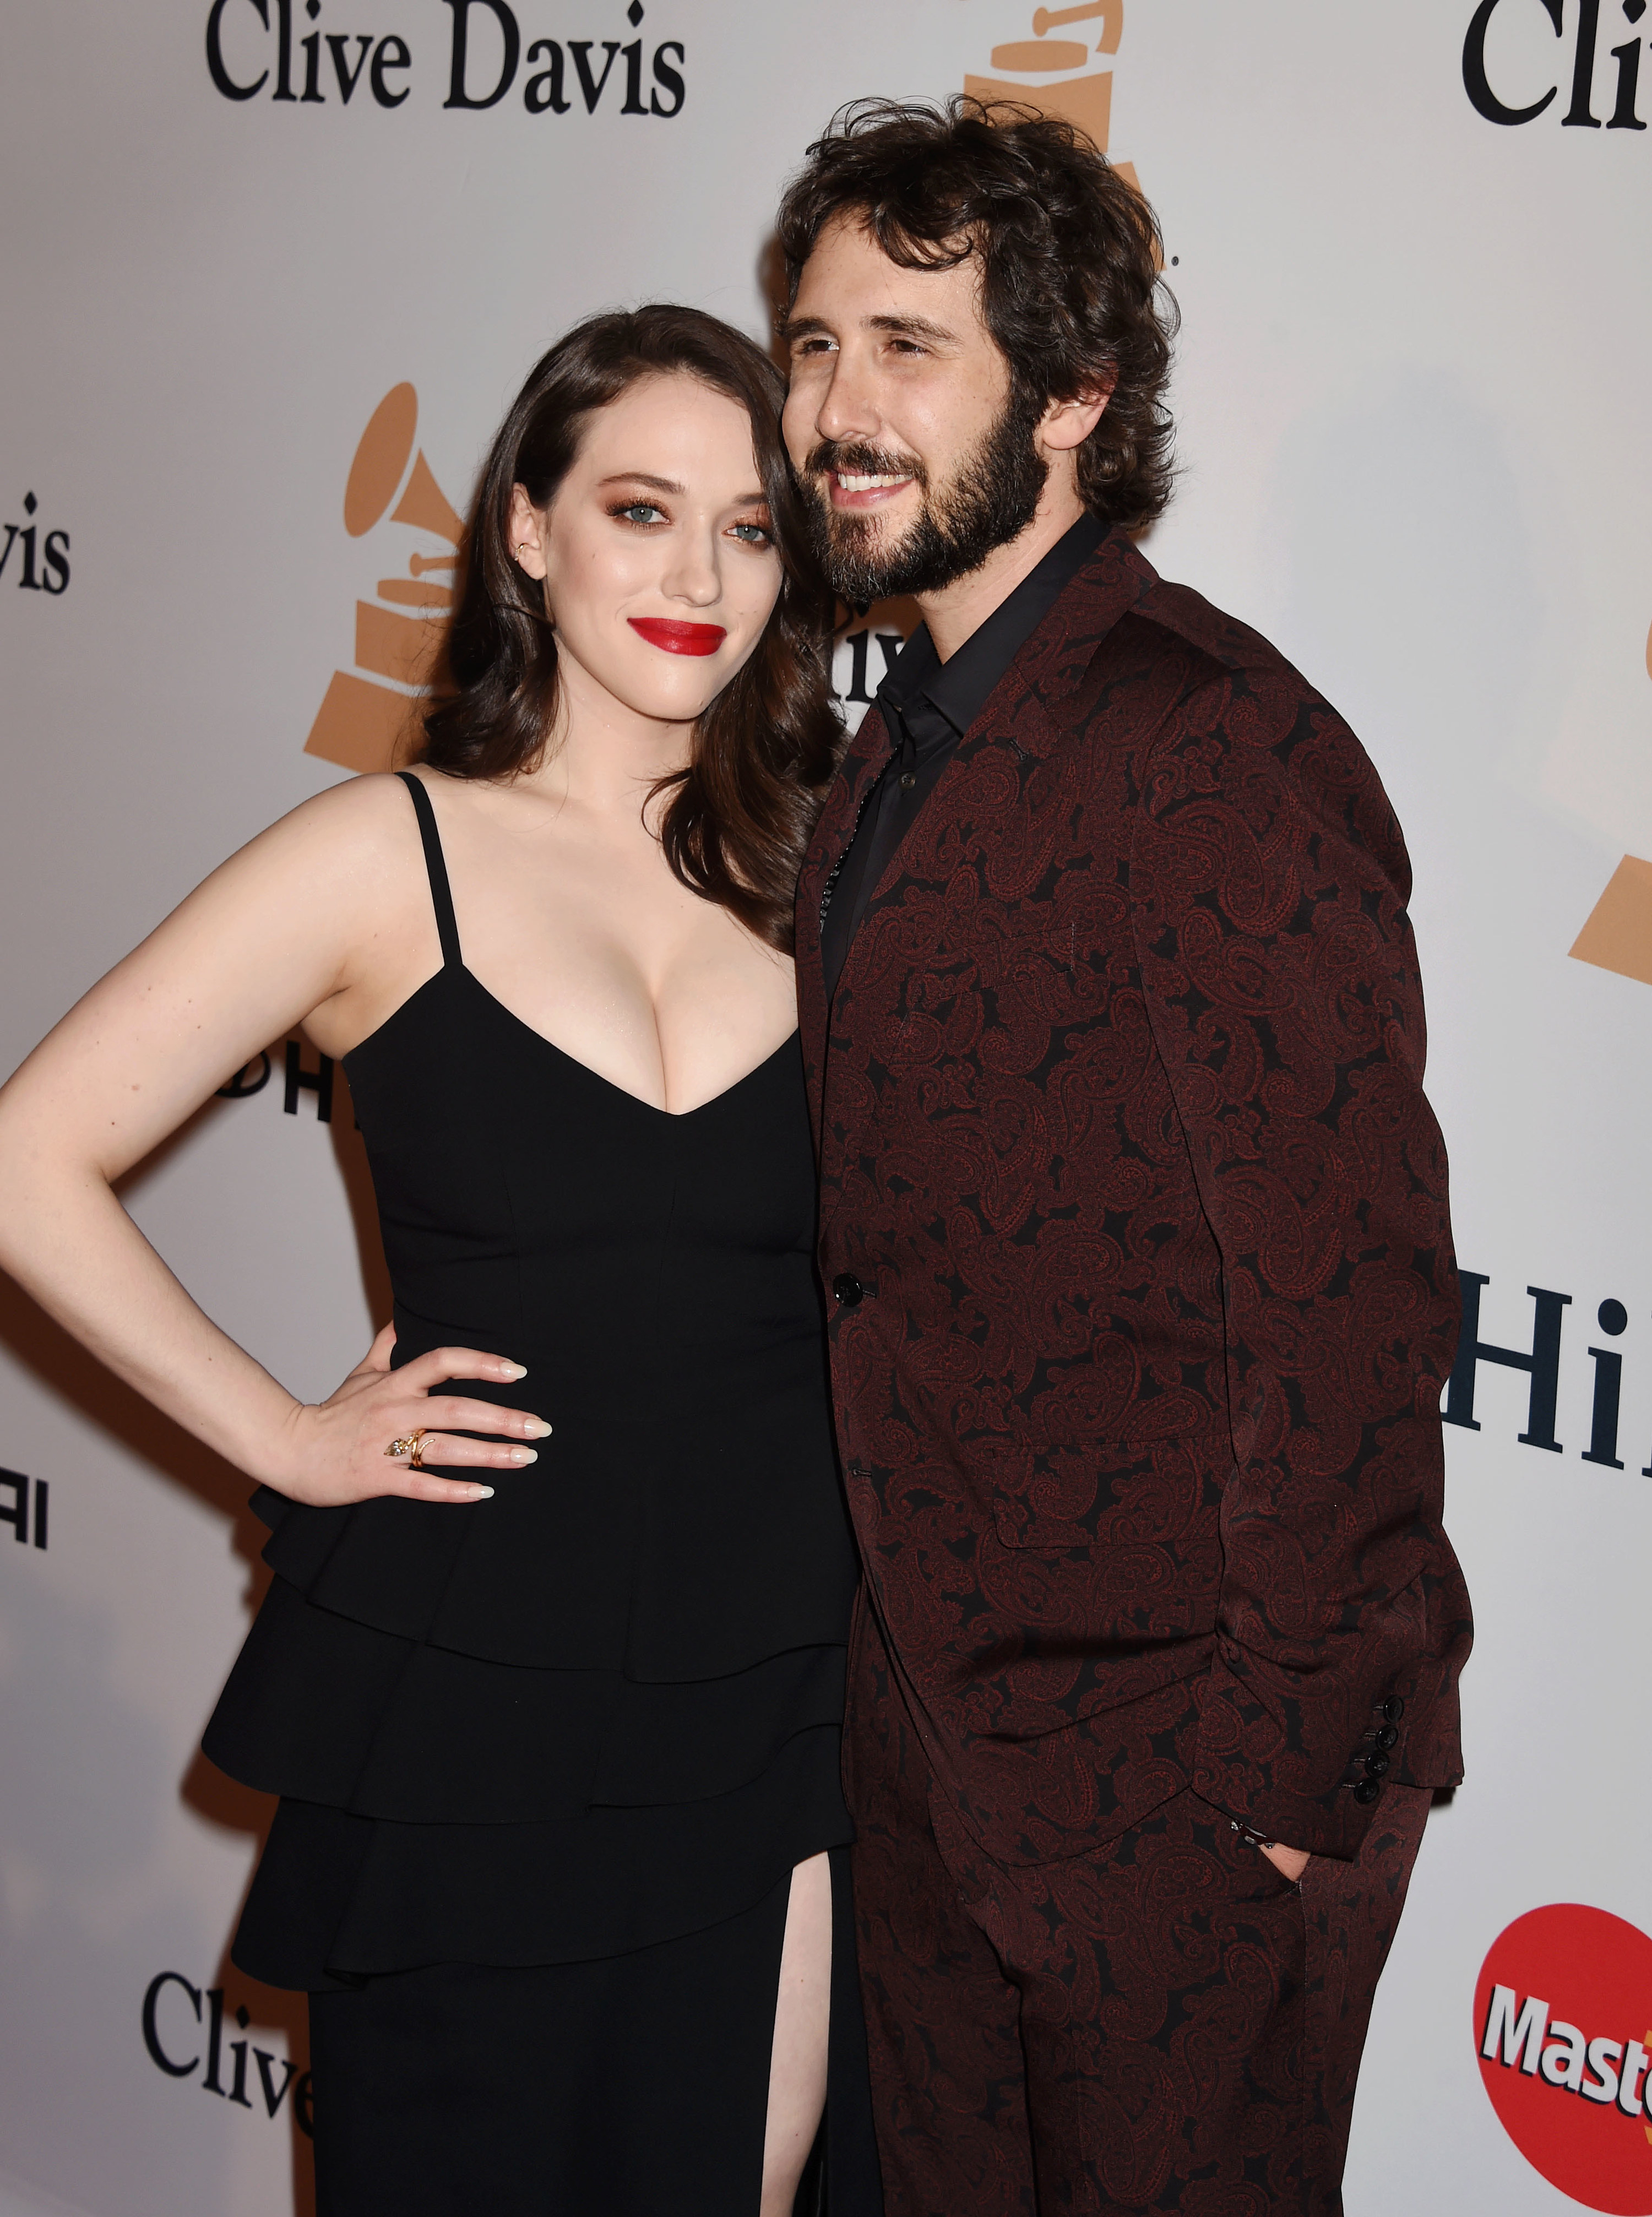 Kat Dennings and Josh Groban posing arm-in-arm on the red carpet in formalwear